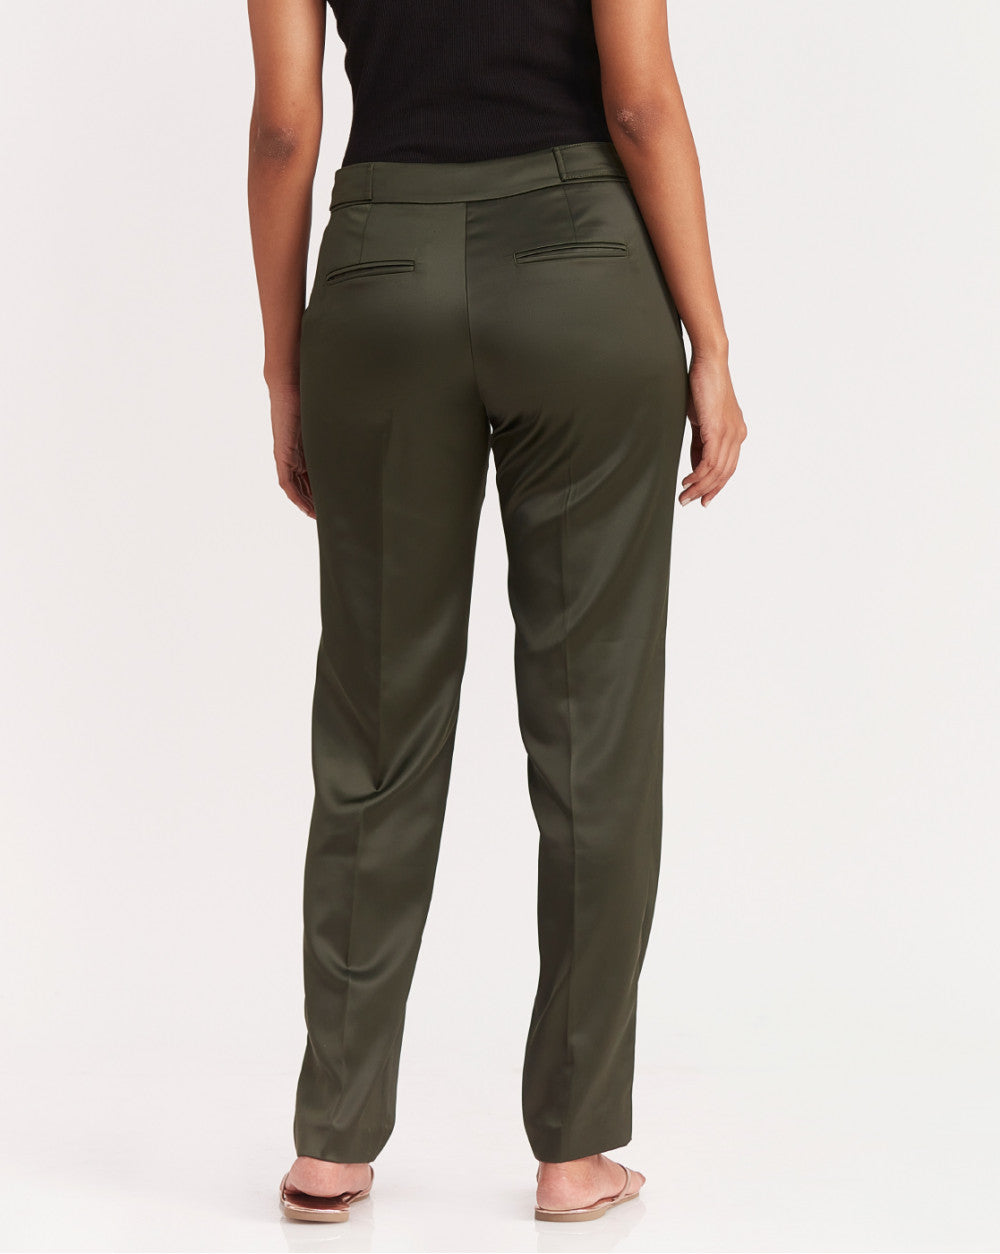 Tapered Fit Satin Smart Pants - Seaweed Green